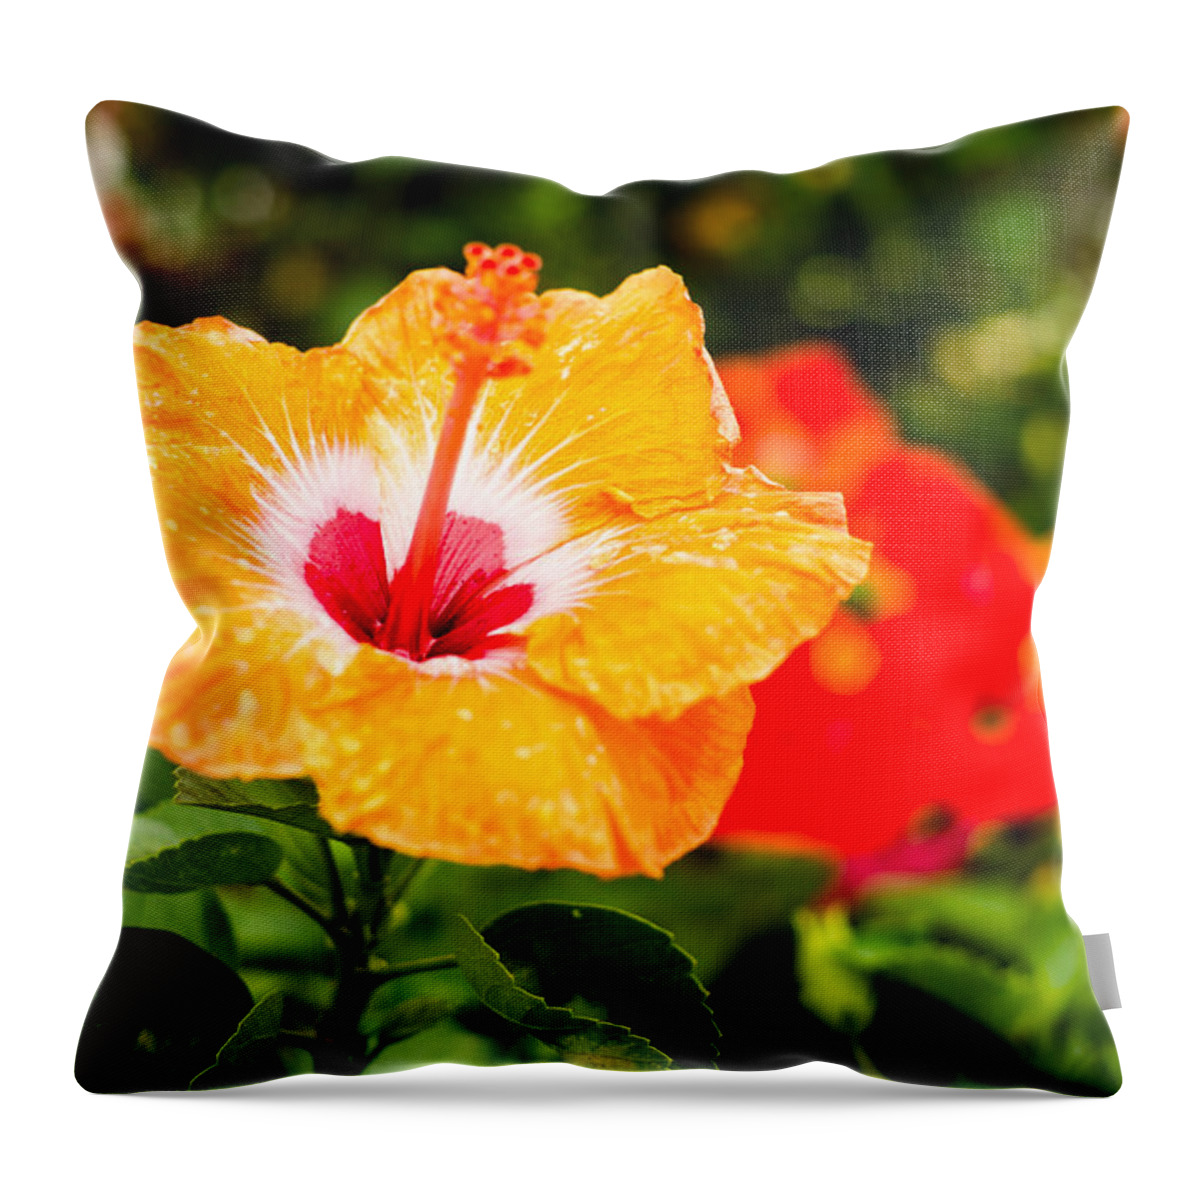 Beautiful Throw Pillow featuring the photograph Beautiful Hibiscus by Raul Rodriguez